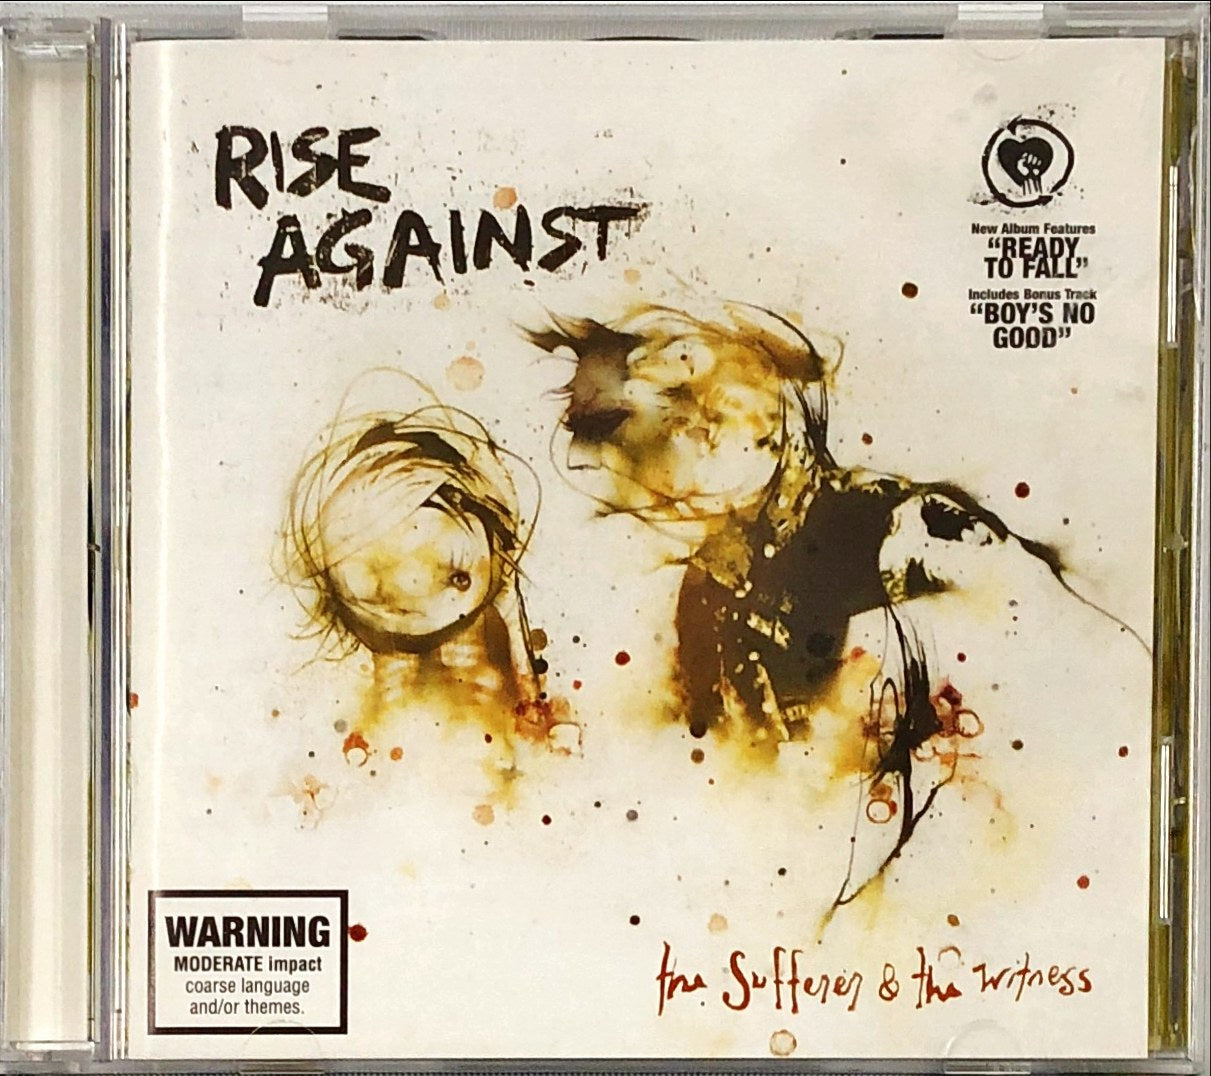 rise against full album the sufferer and the witness